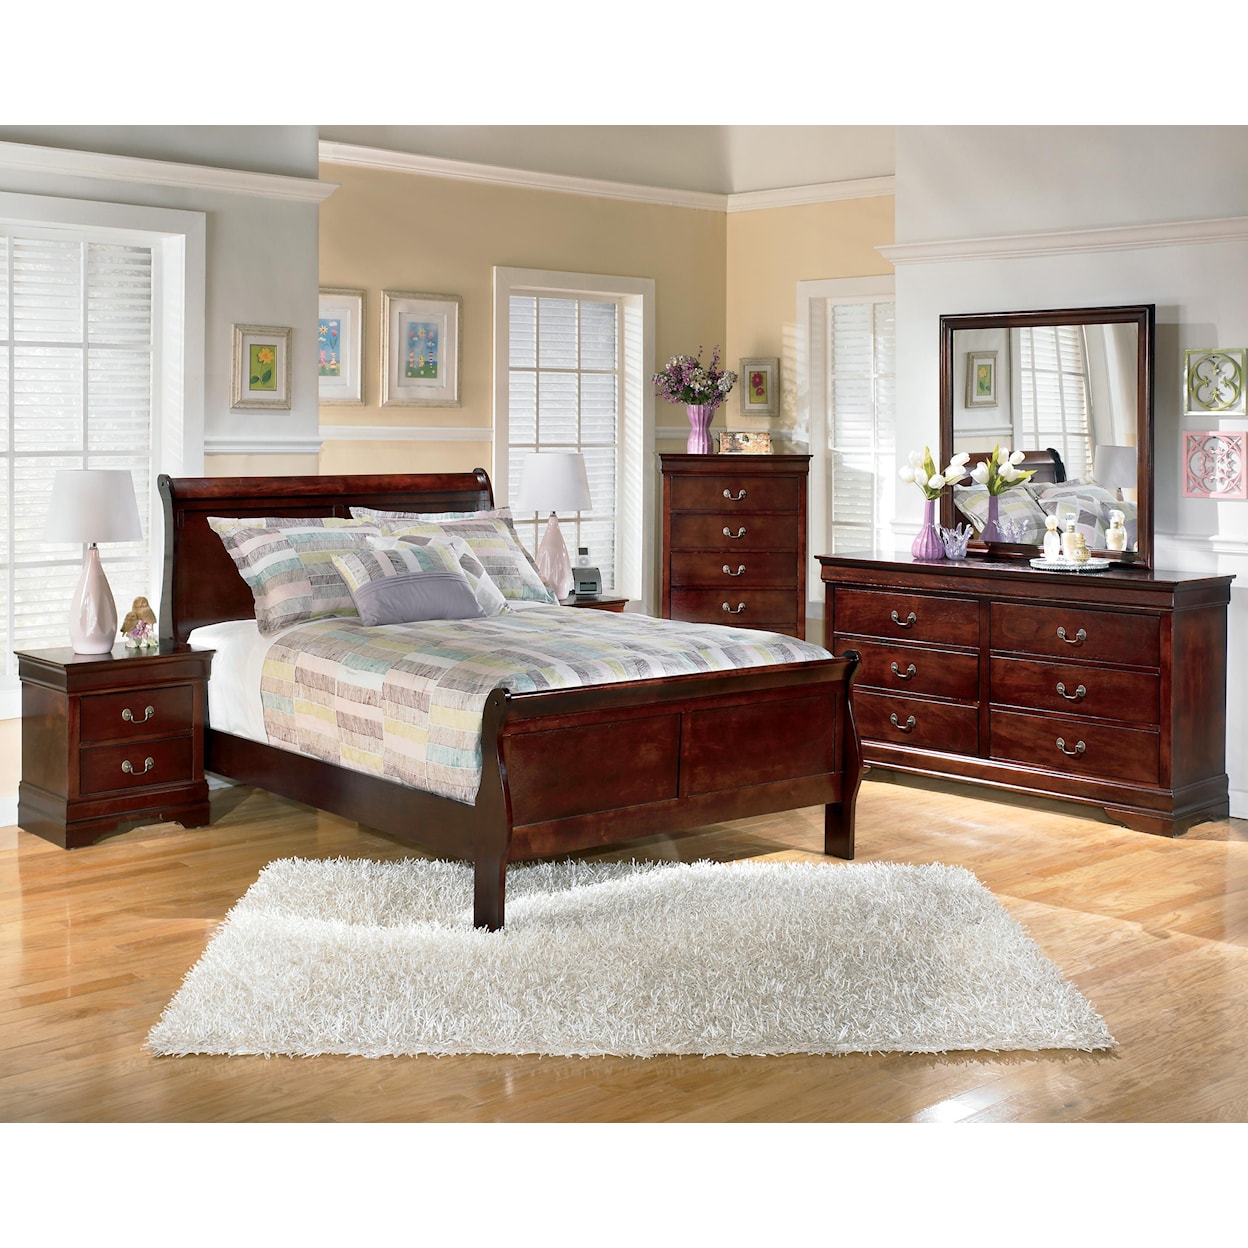 Signature Design by Ashley Alisdair 5 Piece Full Bedroom Group